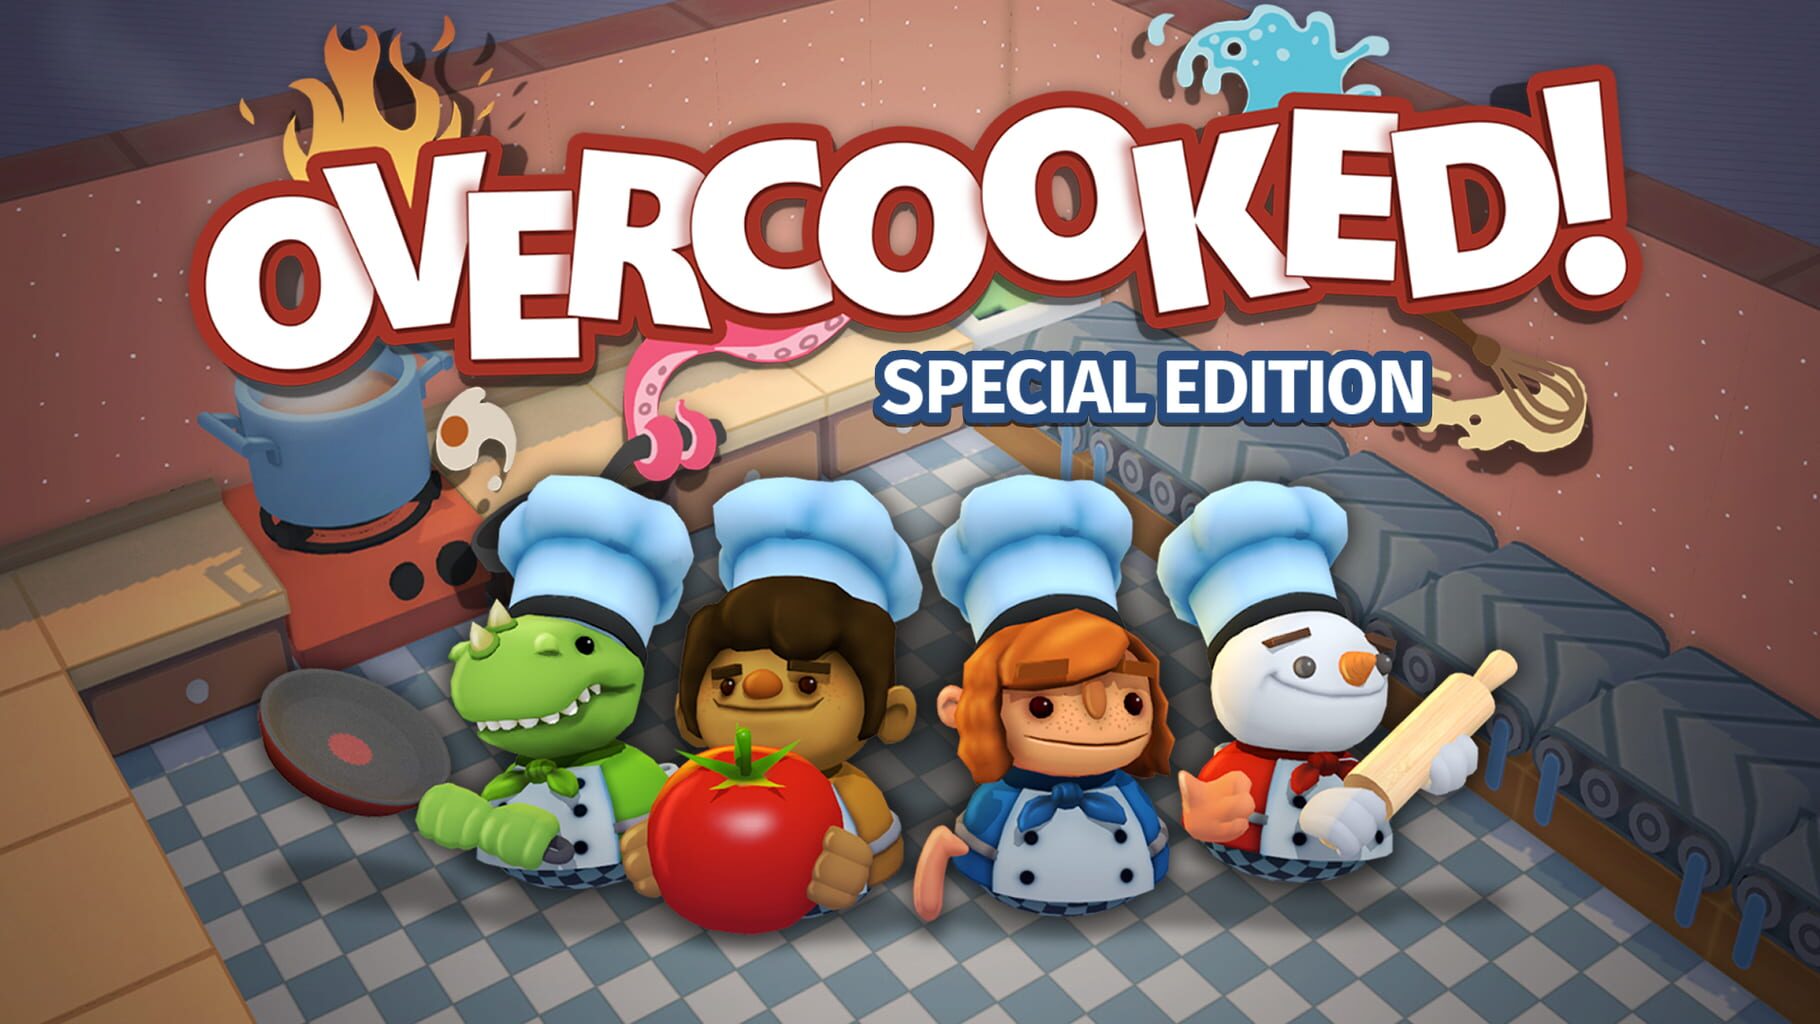 Arte - Overcooked!: Special Edition